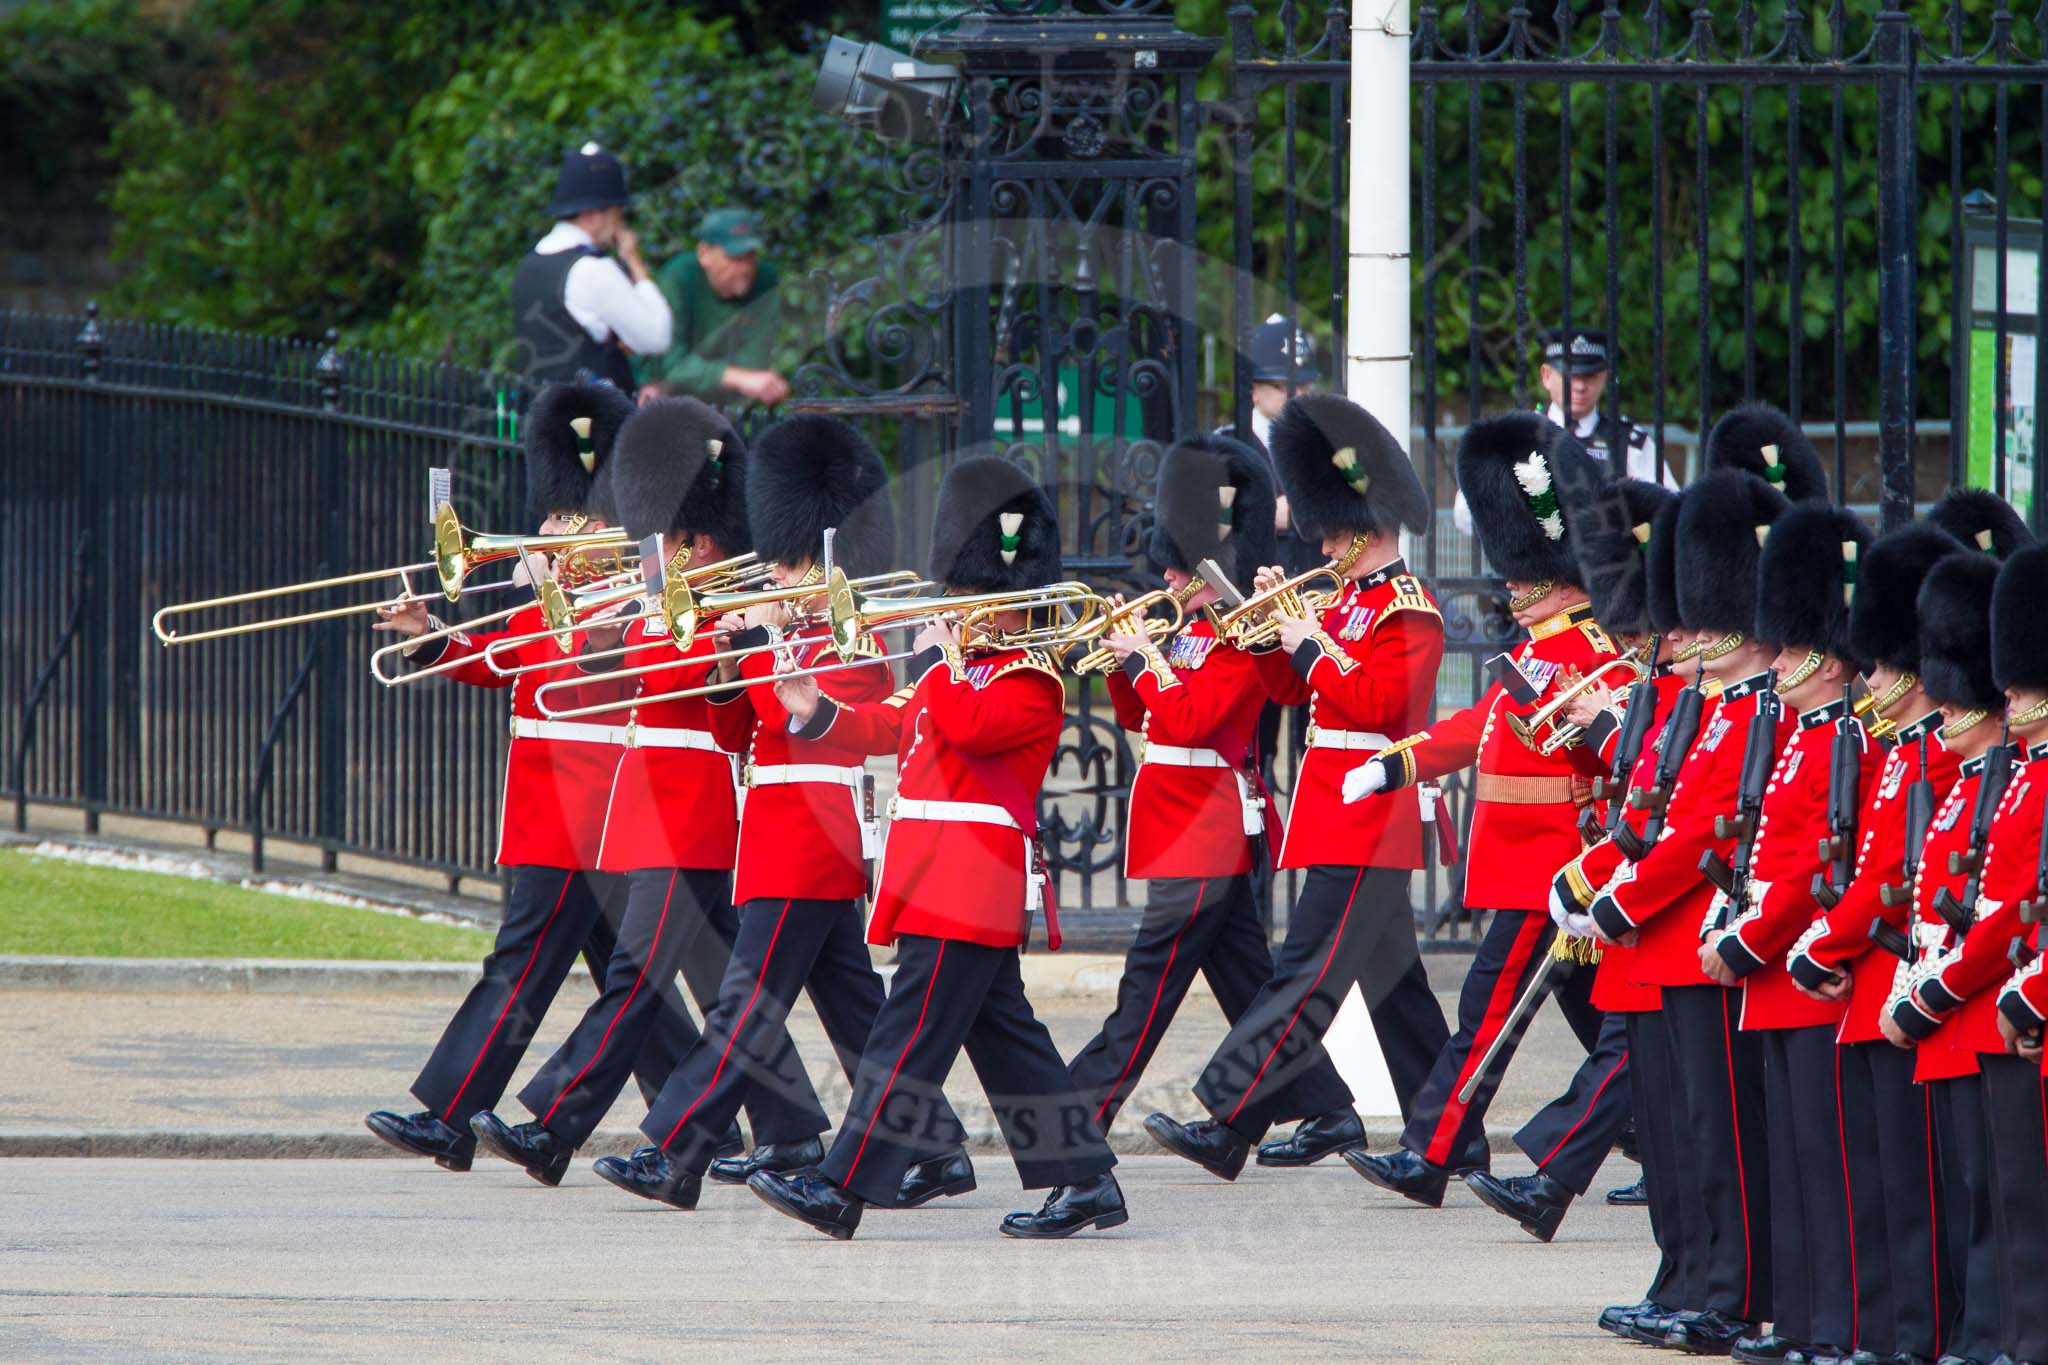 The Colonel's Review 2013: Musicians of the Band of the Welsh Guards..
Horse Guards Parade, Westminster,
London SW1,

United Kingdom,
on 08 June 2013 at 10:31, image #124